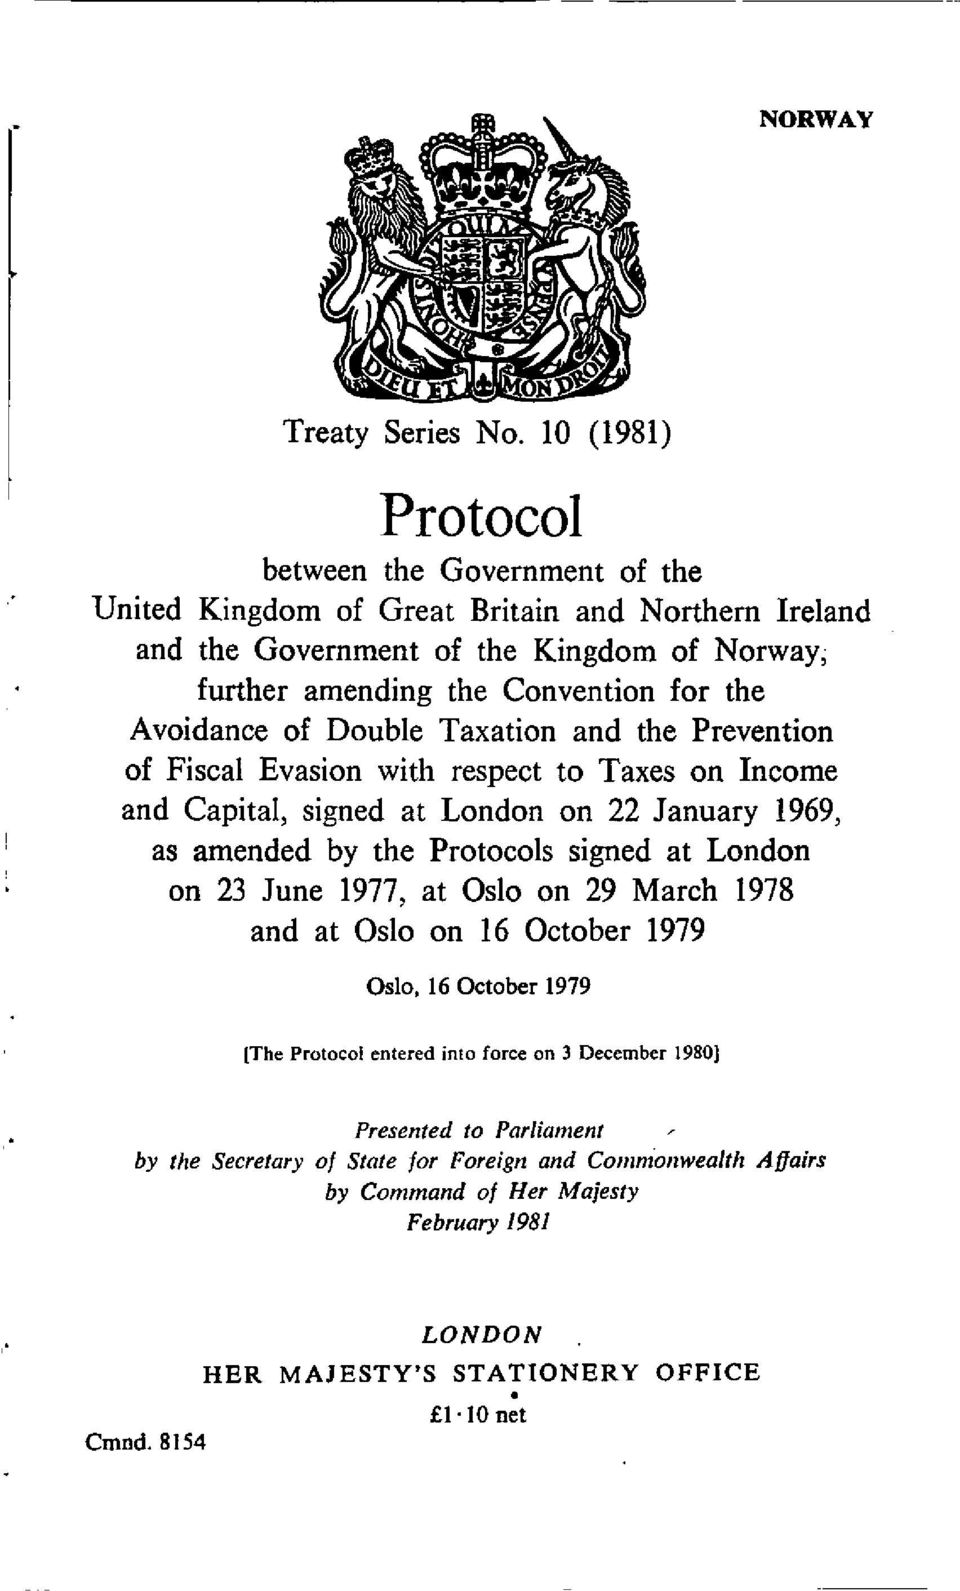 the Avoidance of Double Taxation and the Prevention of Fiscal Evasion with respect to Taxes on Income and Capital, signed at London on 22 January 1969, as amended by the Protocols